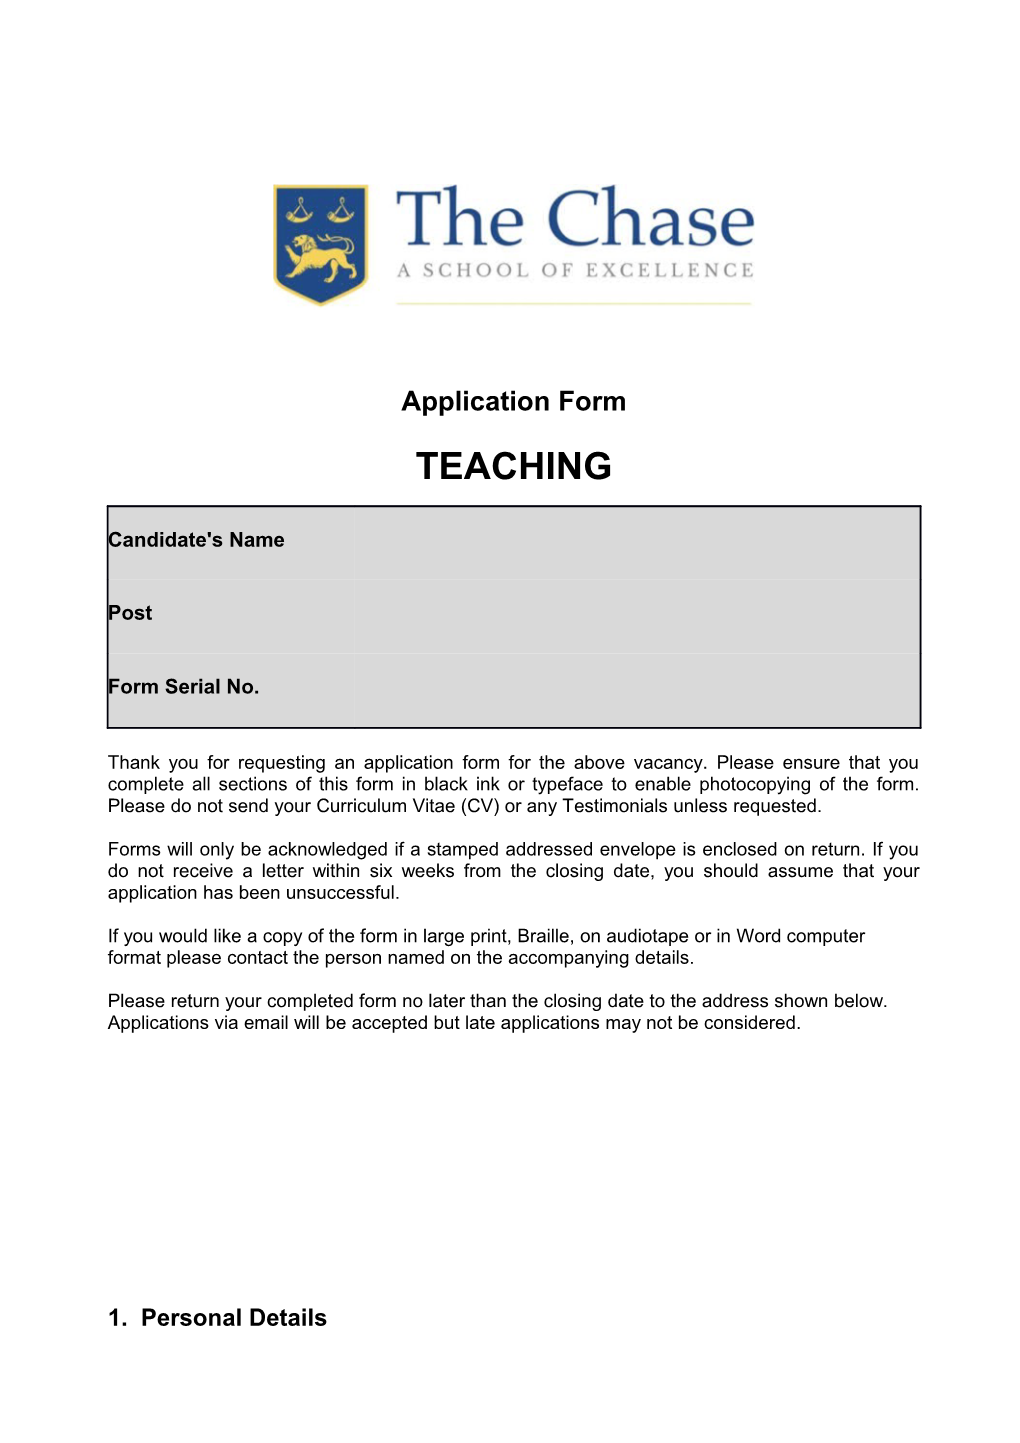 Application Form Teaching - Unprotected - 24 07 13